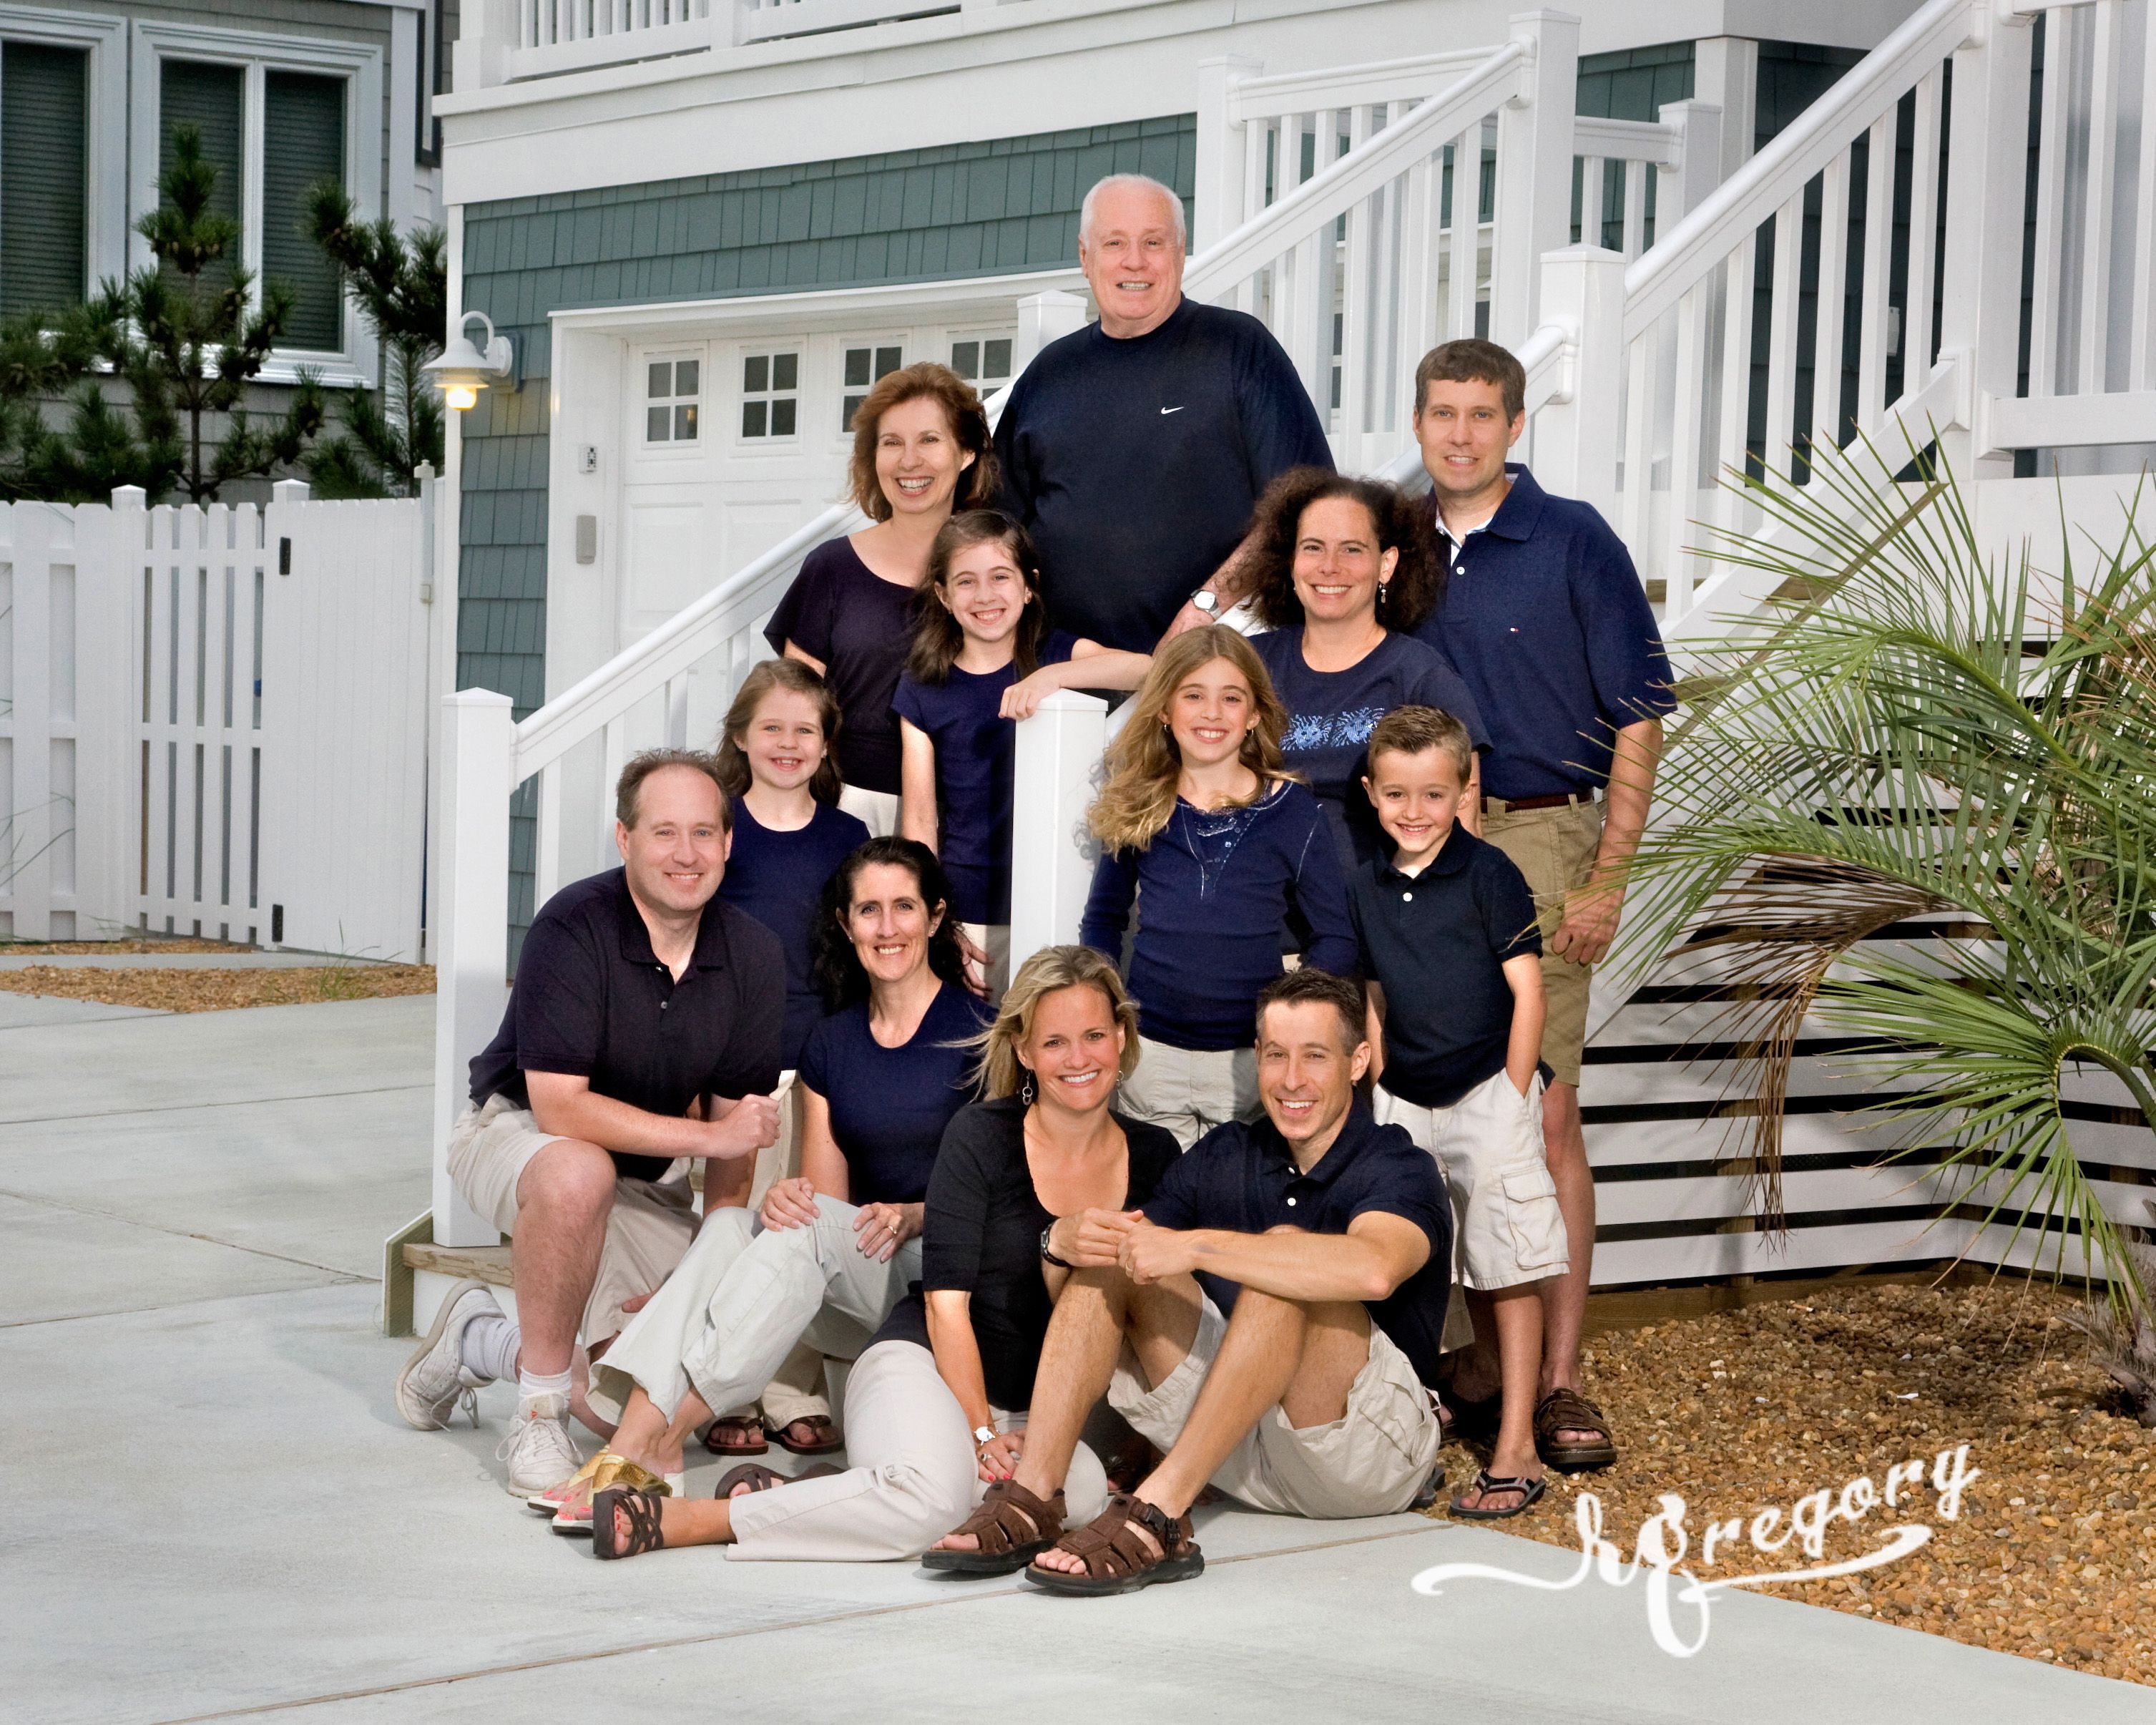 Family Portrait at beach house vacation